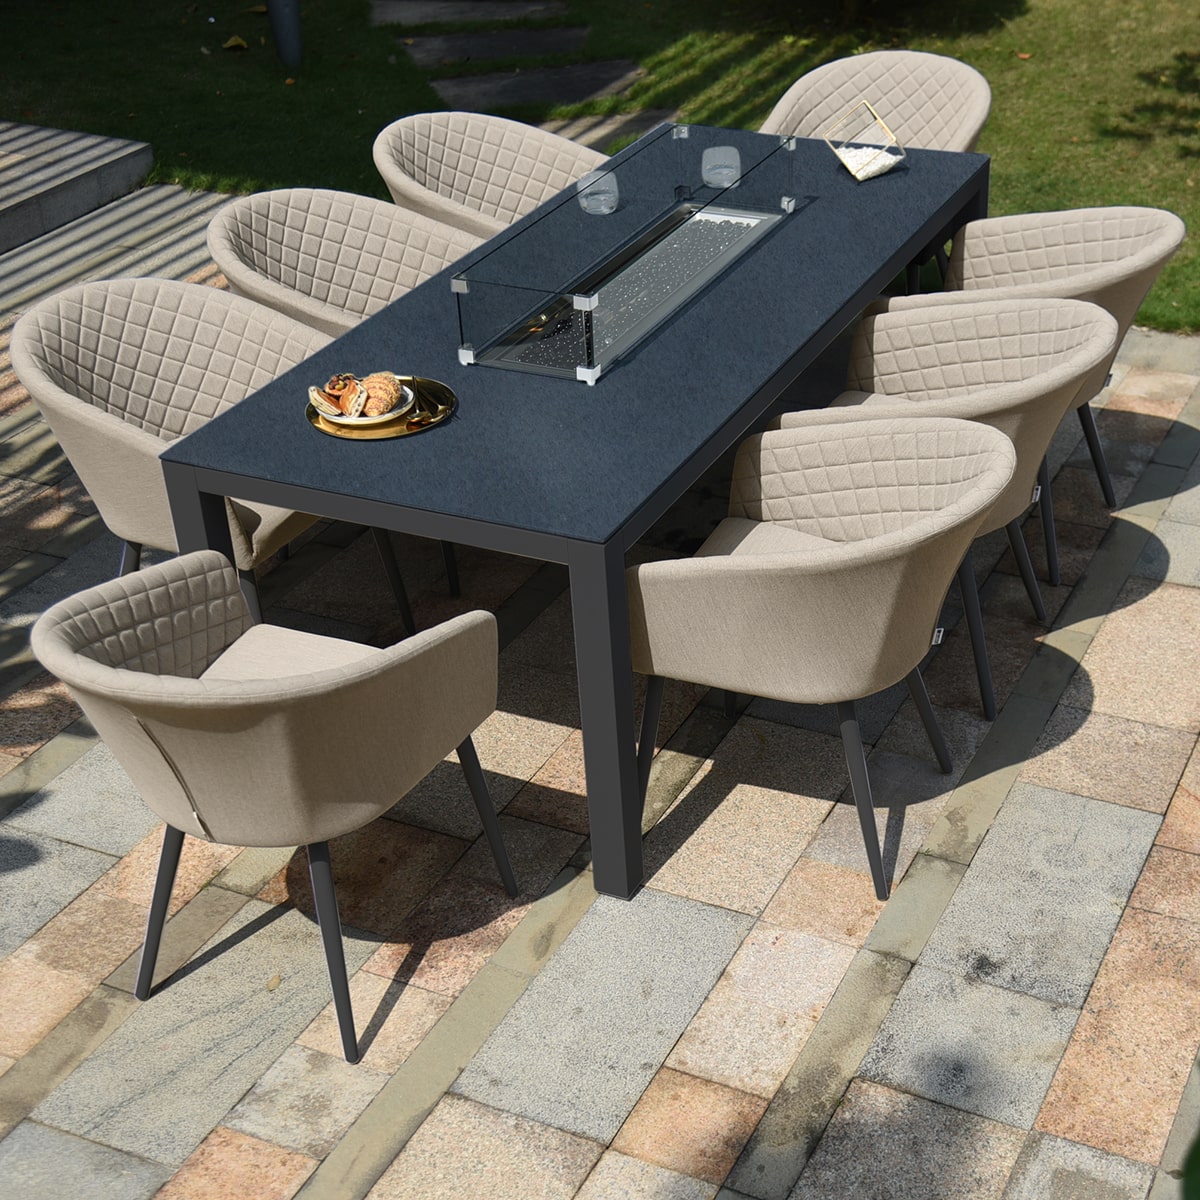 Maze - Outdoor Fabric Ambition 8 Seat Rectangular Dining Set with Fire Pit Table - Oatmeal